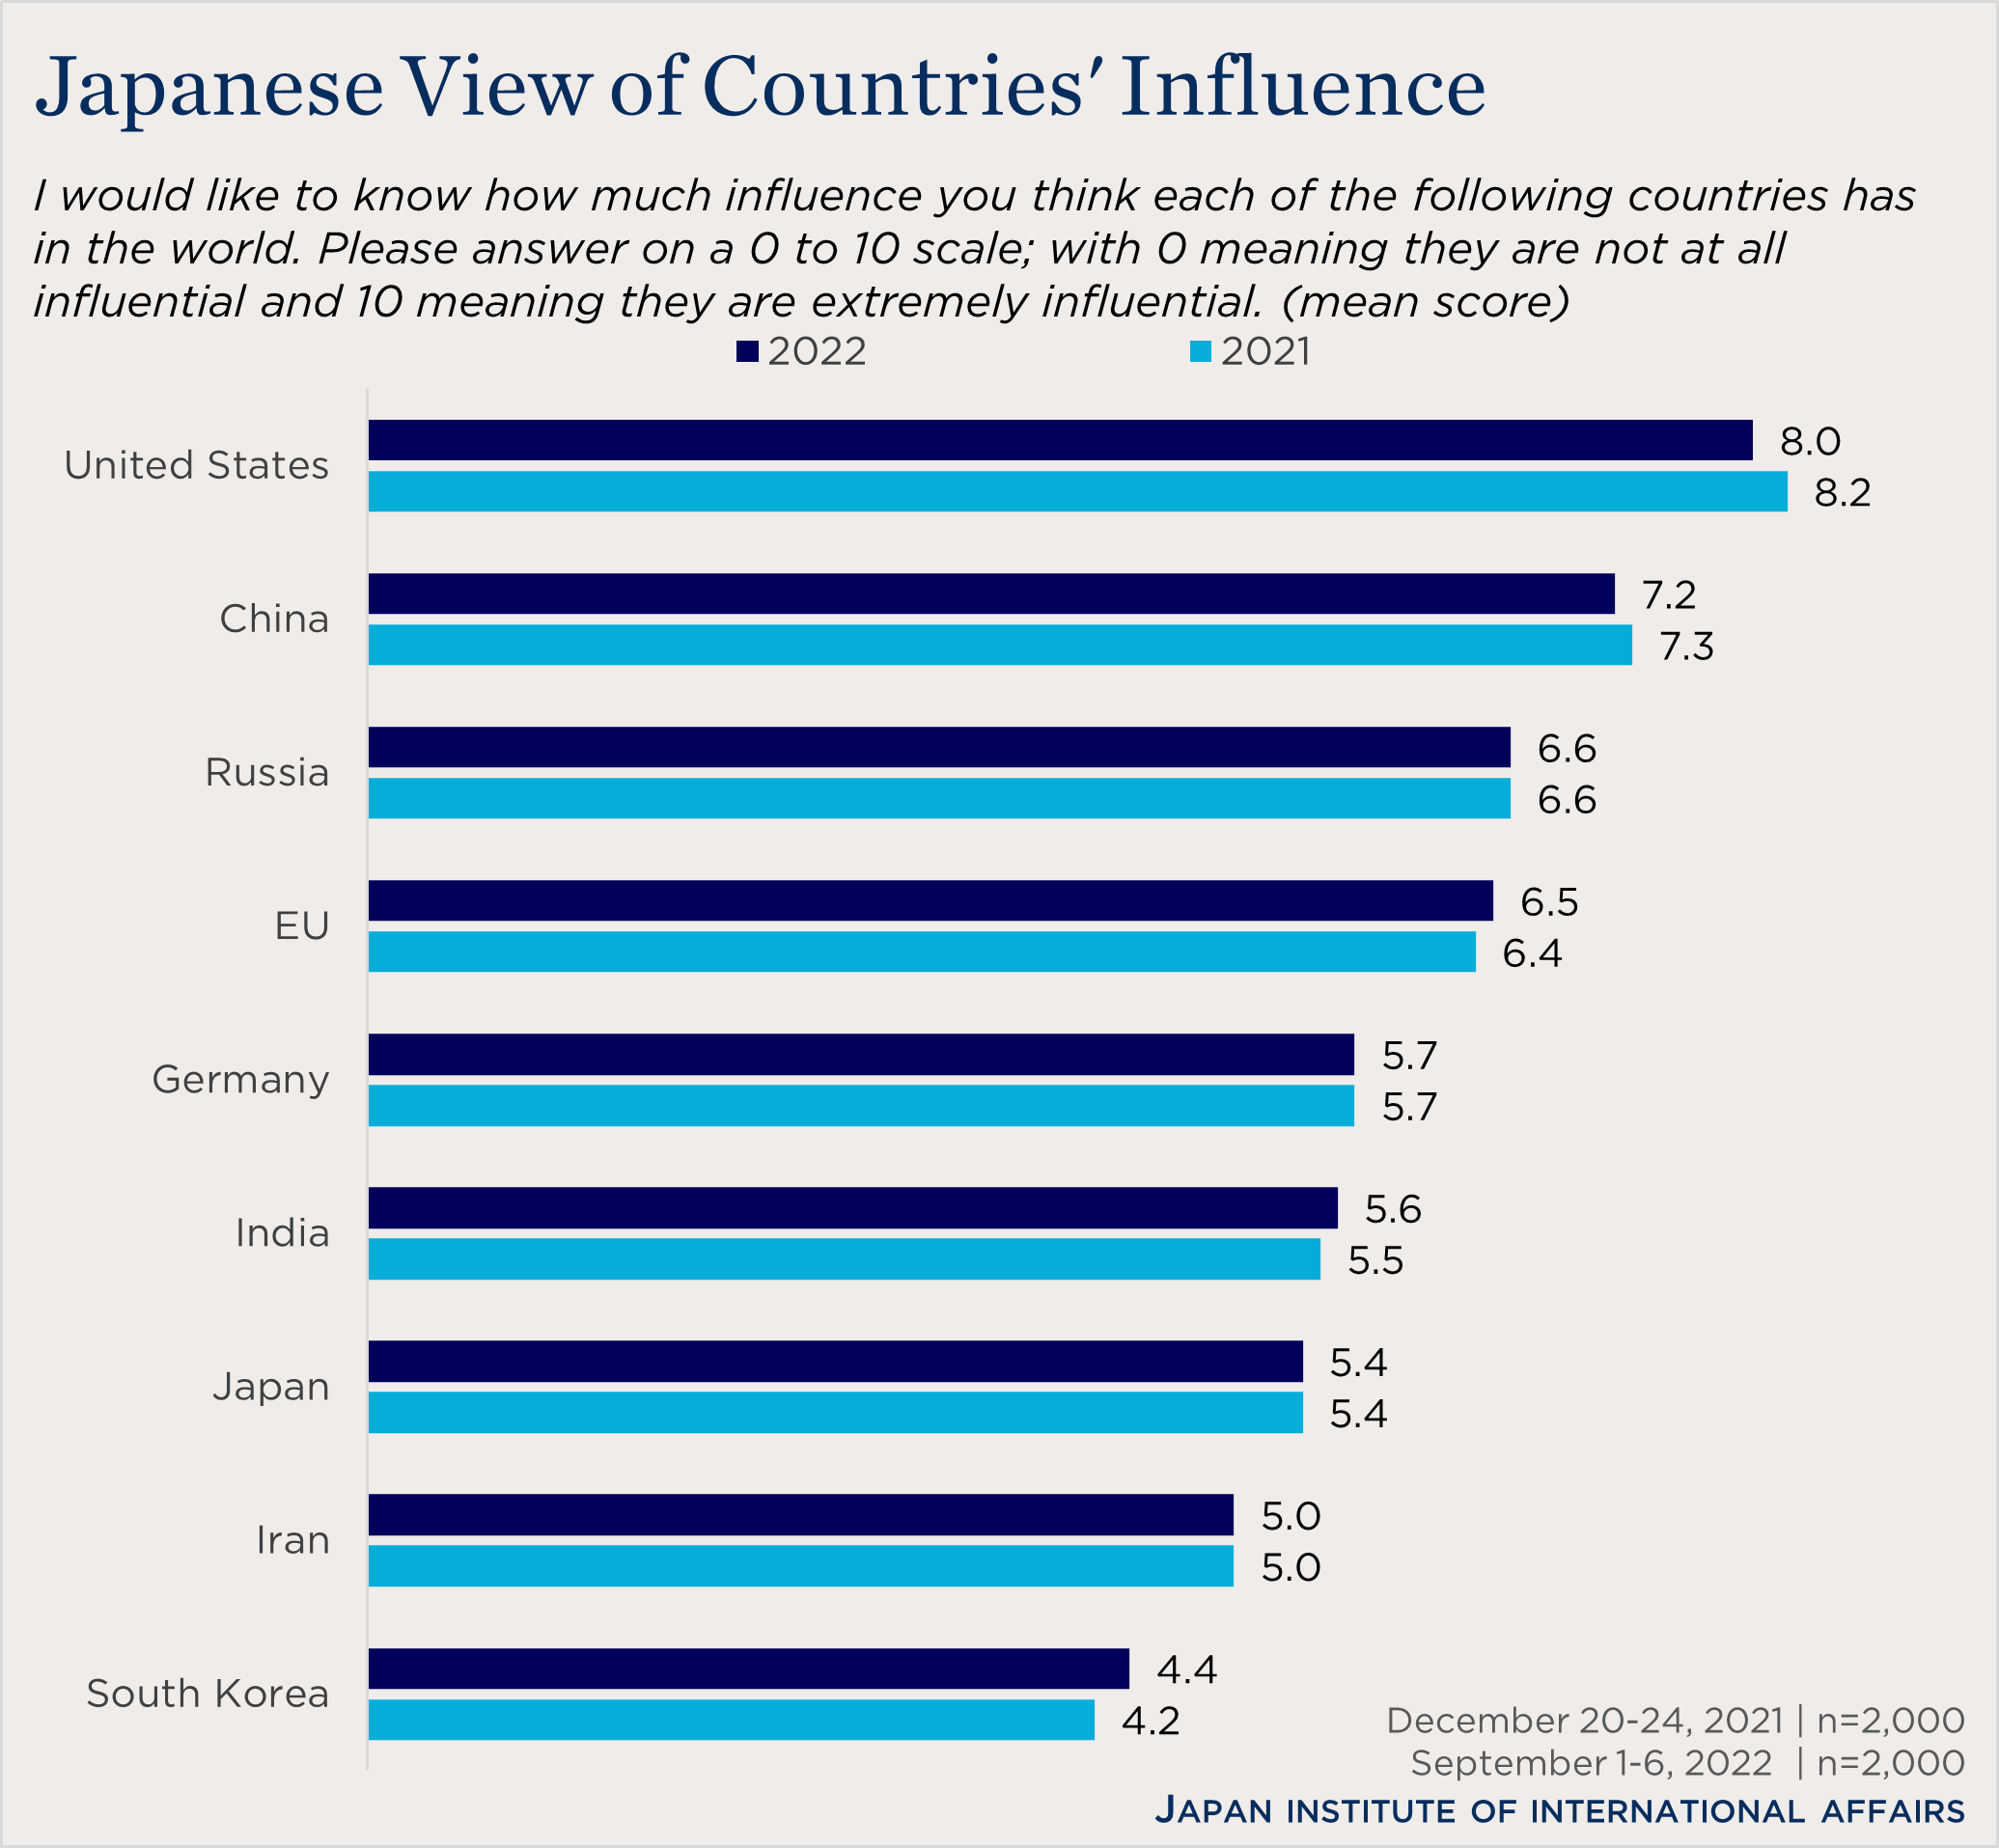 "bar chart showing Japanese view of countries' influence"